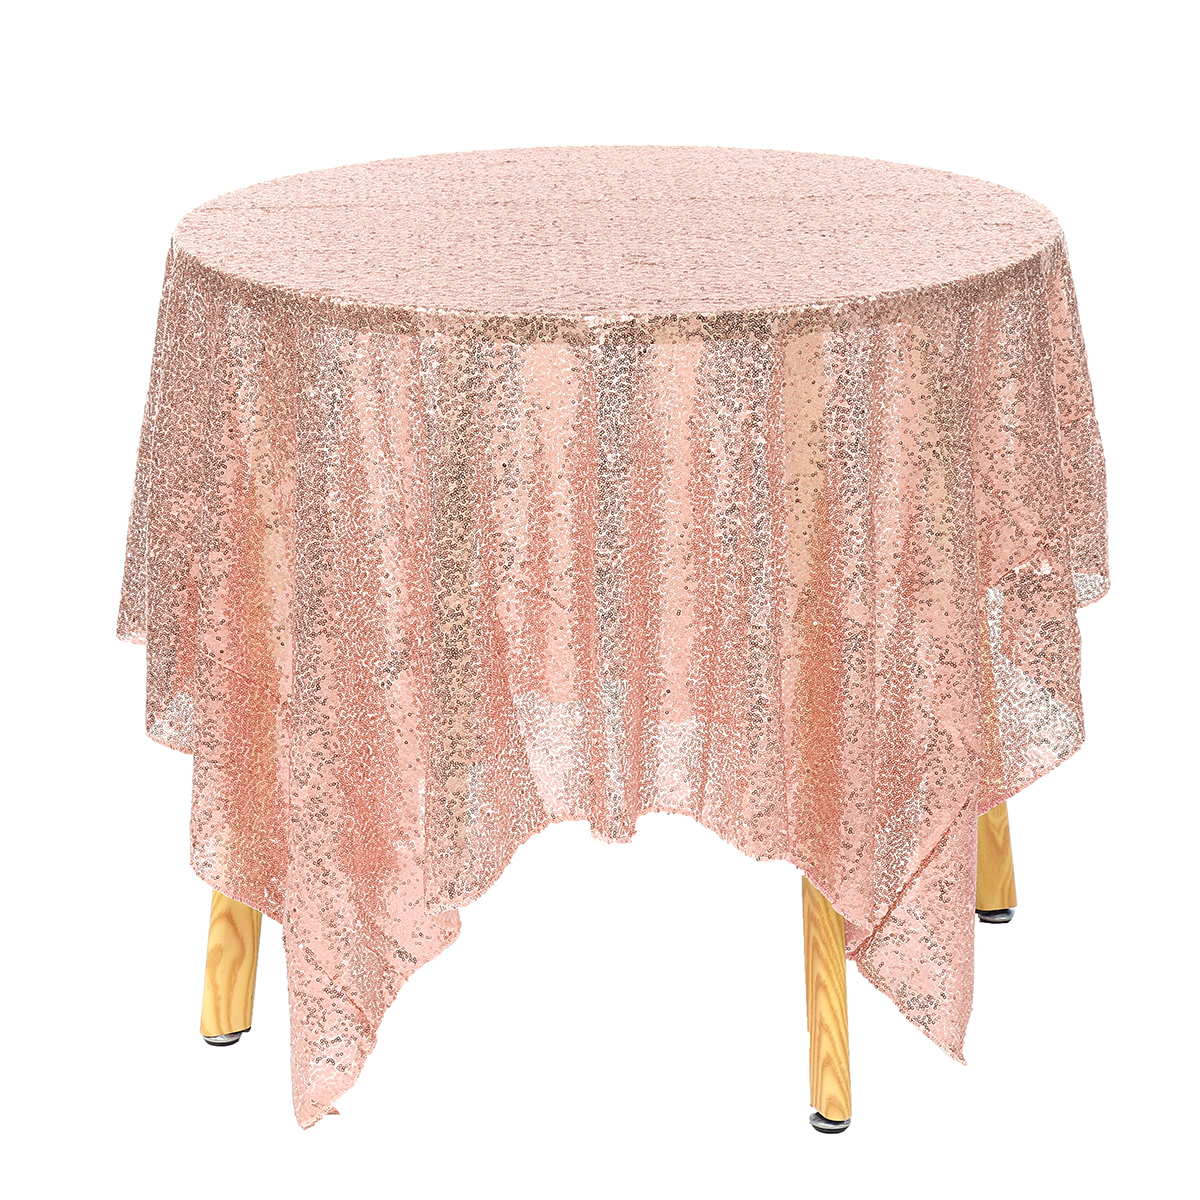 Sequin-Fabric-Wedding-Party-Table-Covers-Photography-Backdrop-Curtains-Table-Cloth-1636379-9